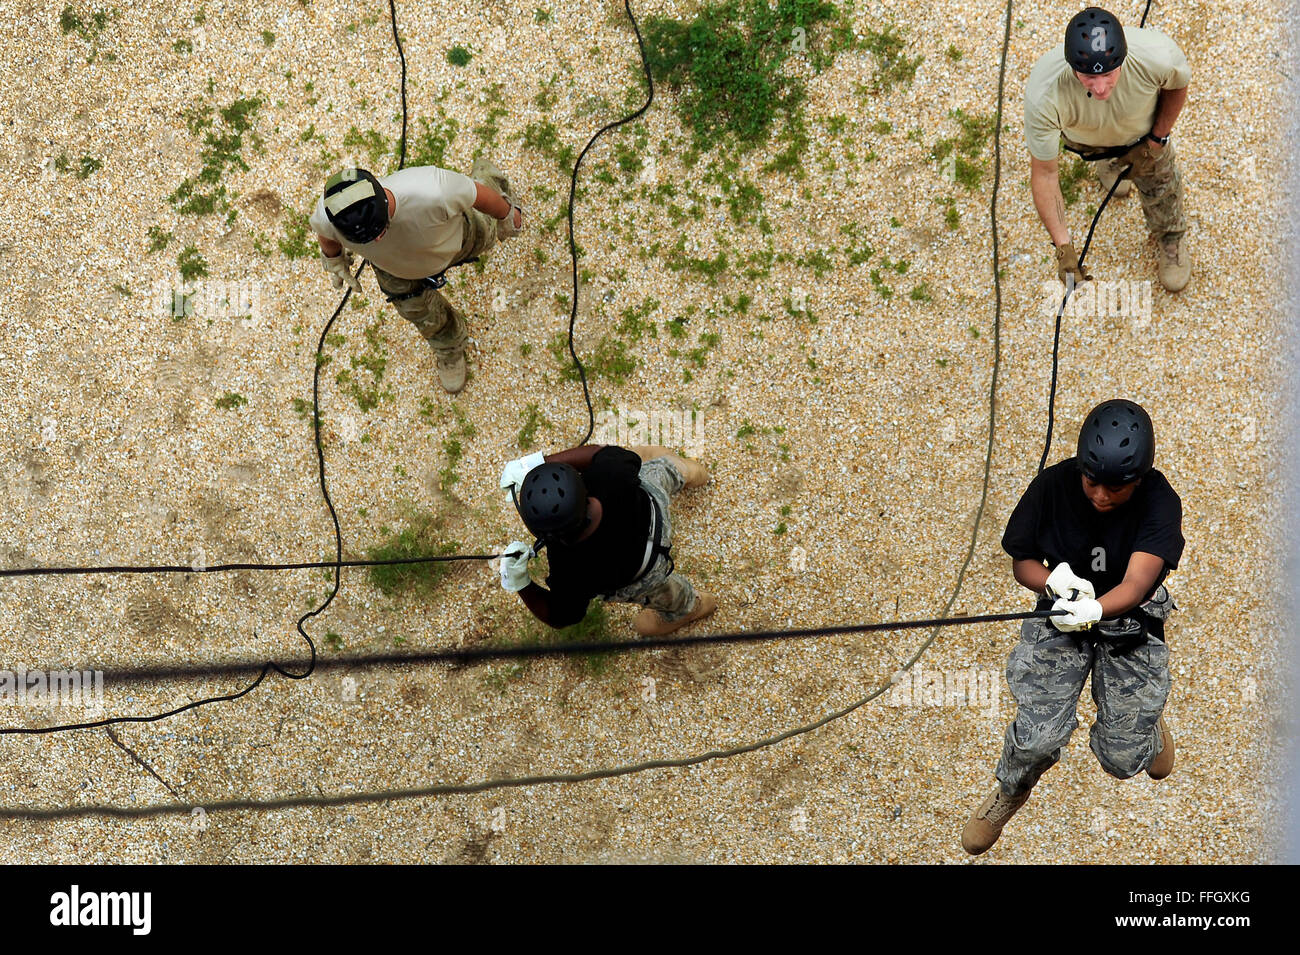 Air Force JROTC cadets successfully repel down a tower as part of a summer leadership school program. The program prepares cadets for leadership roles in their units, schools and communities. Stock Photo